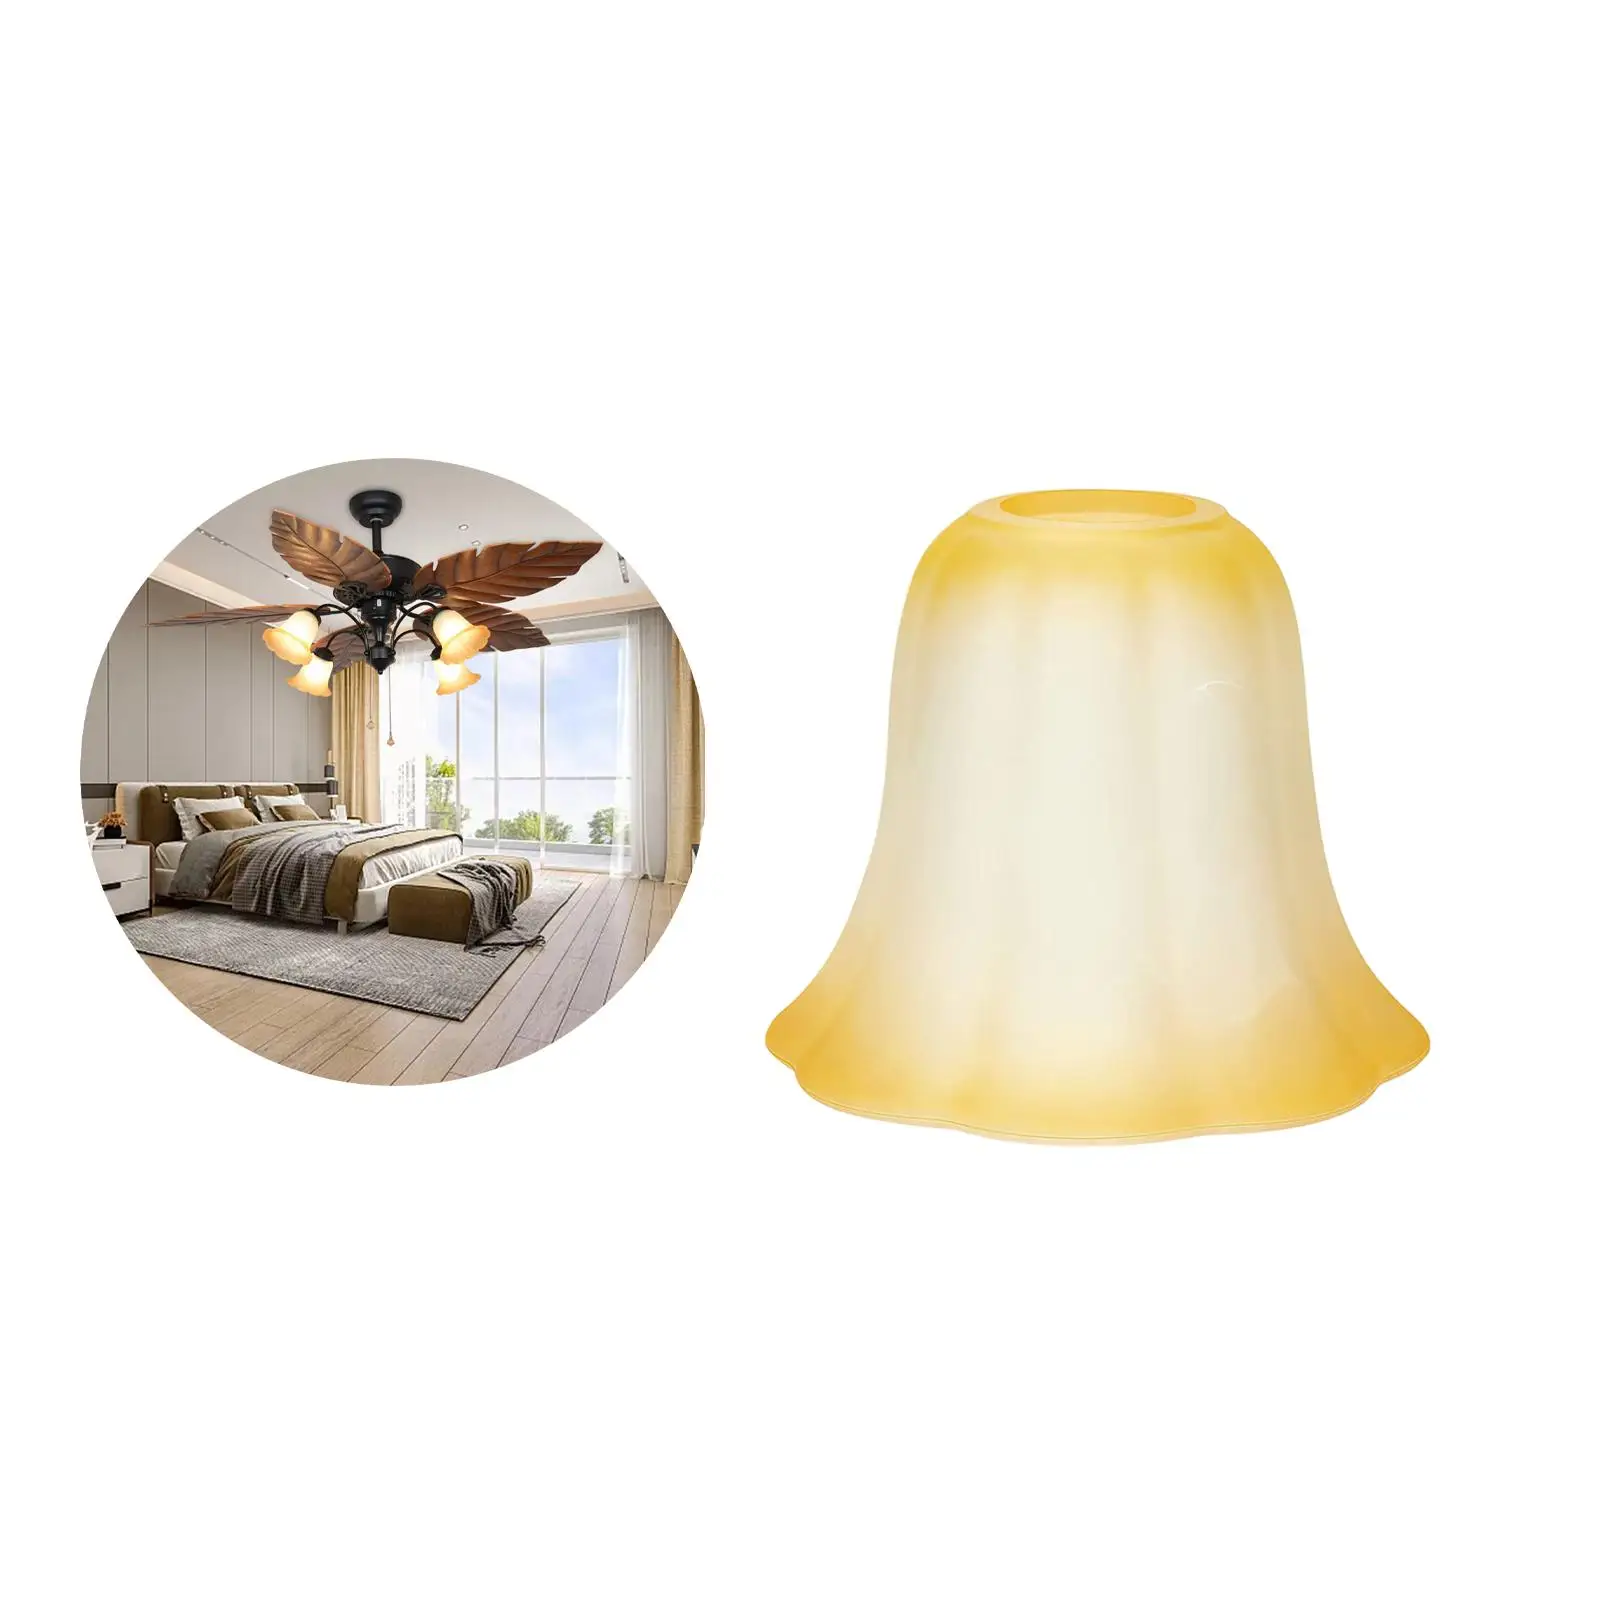 Ceiling Light Fixture Cover Replacement Frosted Glass Lamp Shade for Lantern Table Lamp